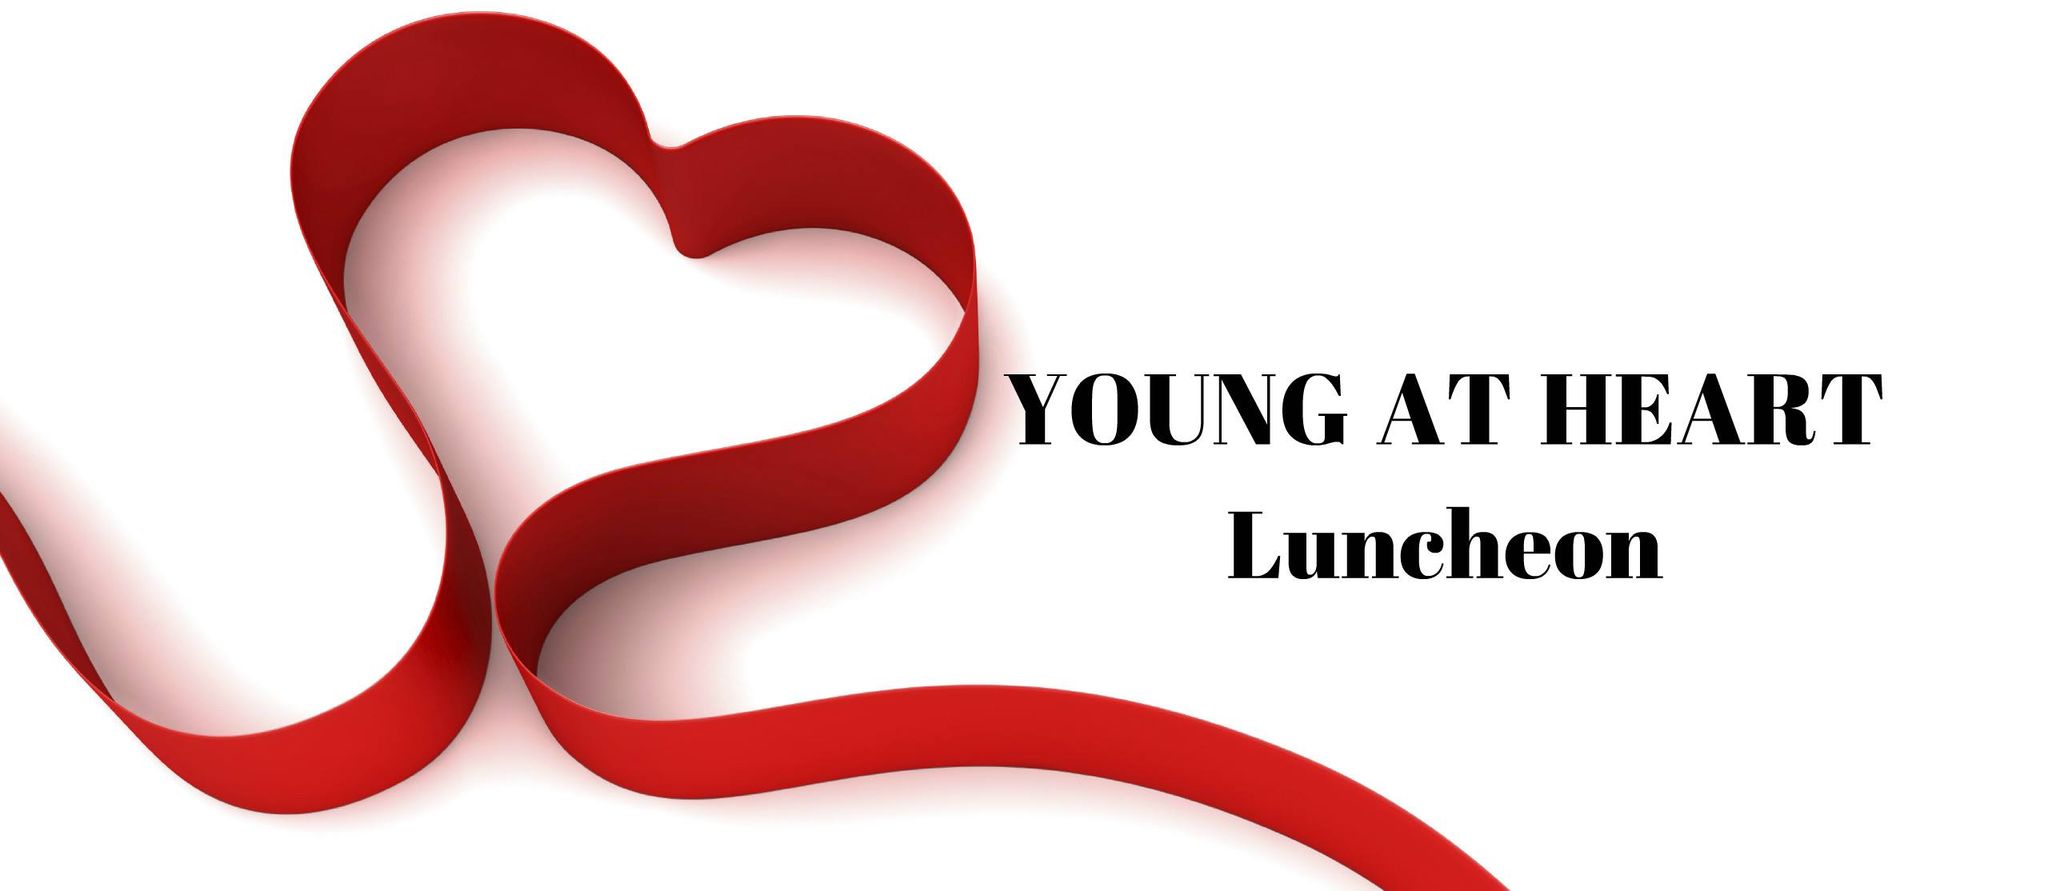 Young at Heart luncheon logo